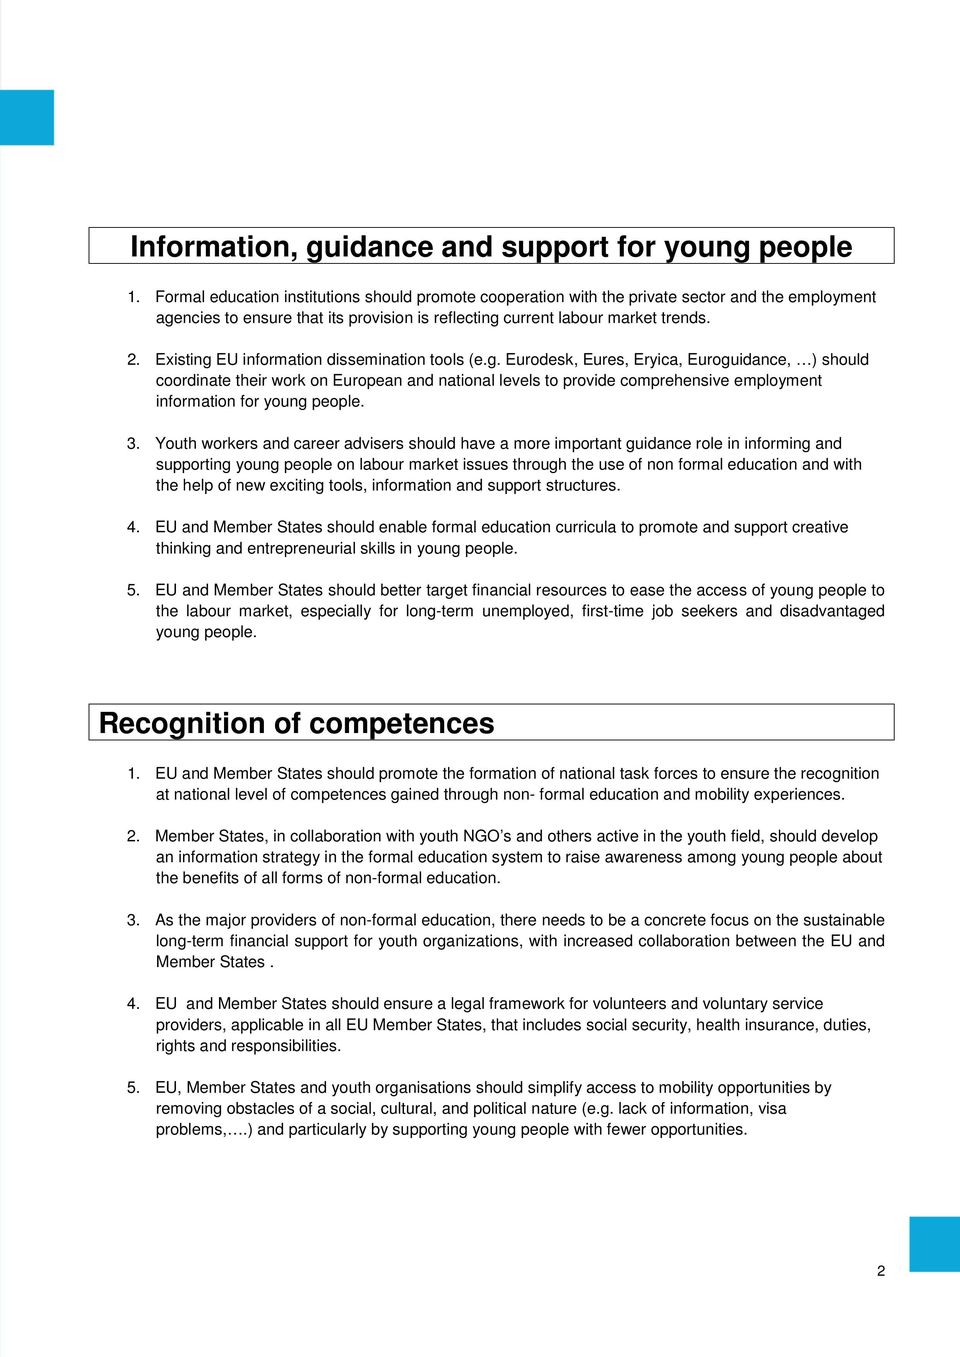 Existing EU information dissemination tools (e.g. Eurodesk, Eures, Eryica, Euroguidance, ) should coordinate their work on European and national levels to provide comprehensive employment information for young people.